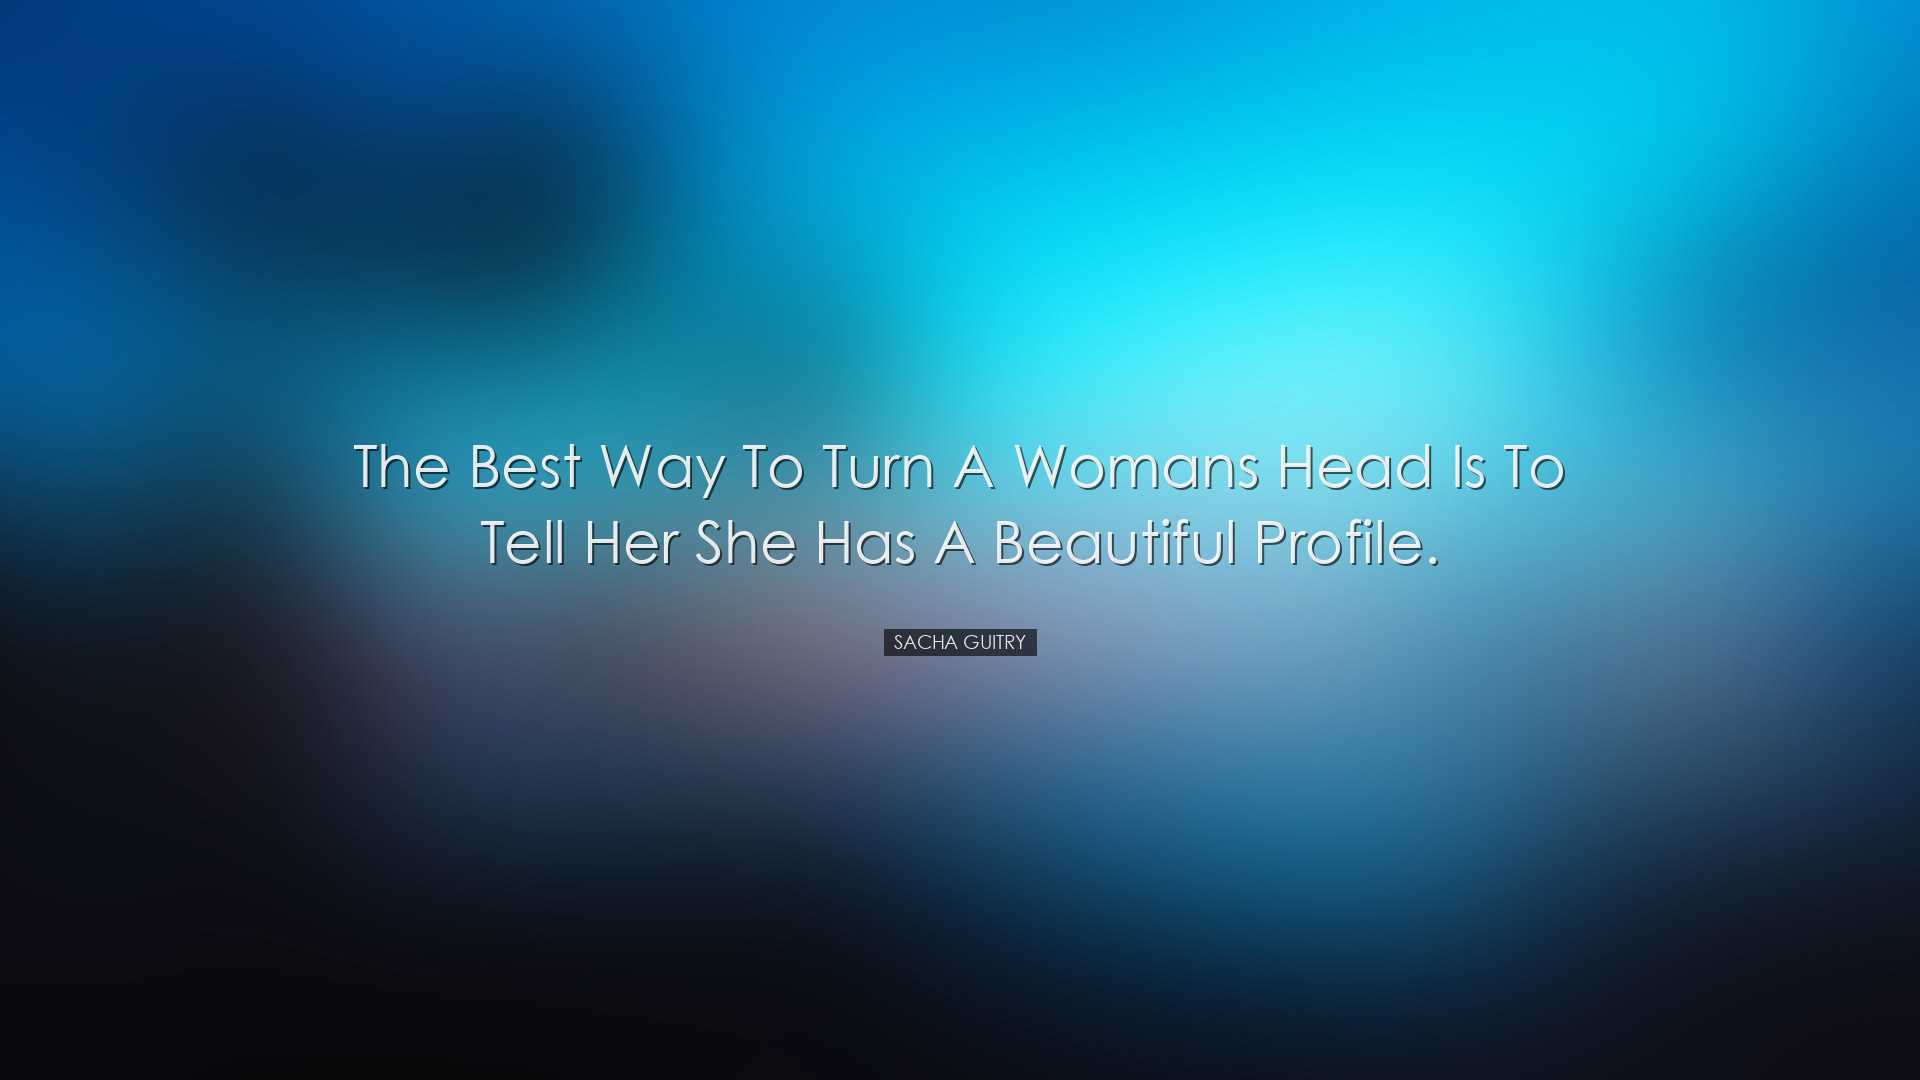 The best way to turn a womans head is to tell her she has a beauti